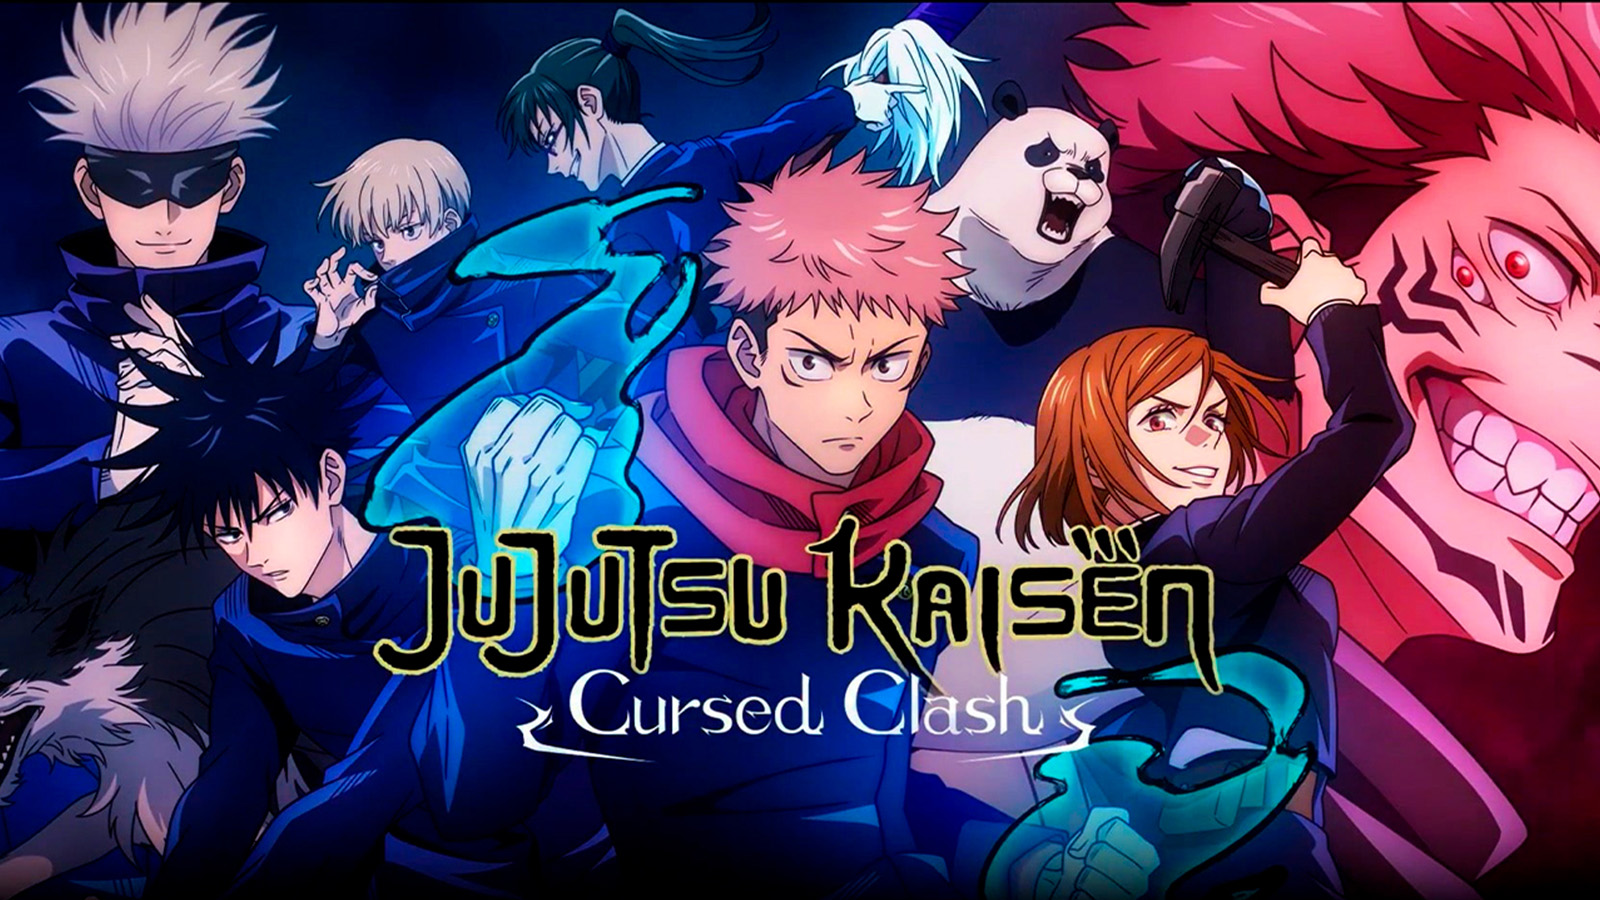 The Different Editions Of Jujutsu Kaisen Cursed Clash